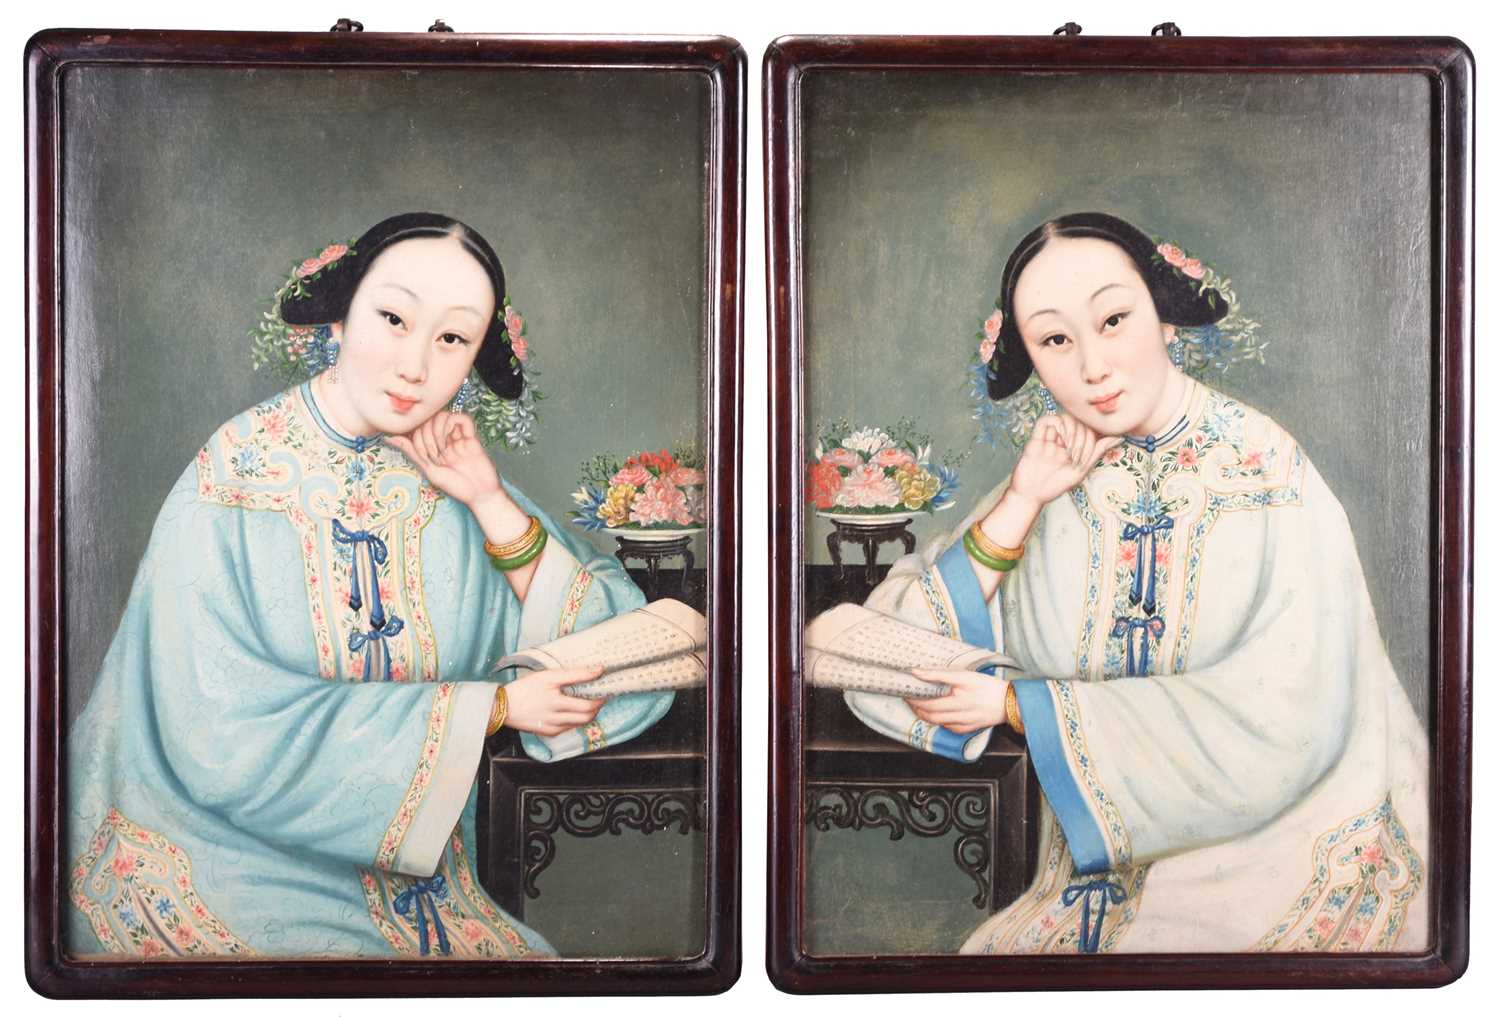 370 - Follower of Lam Qua, a pair of Chinese School portraits of a woman